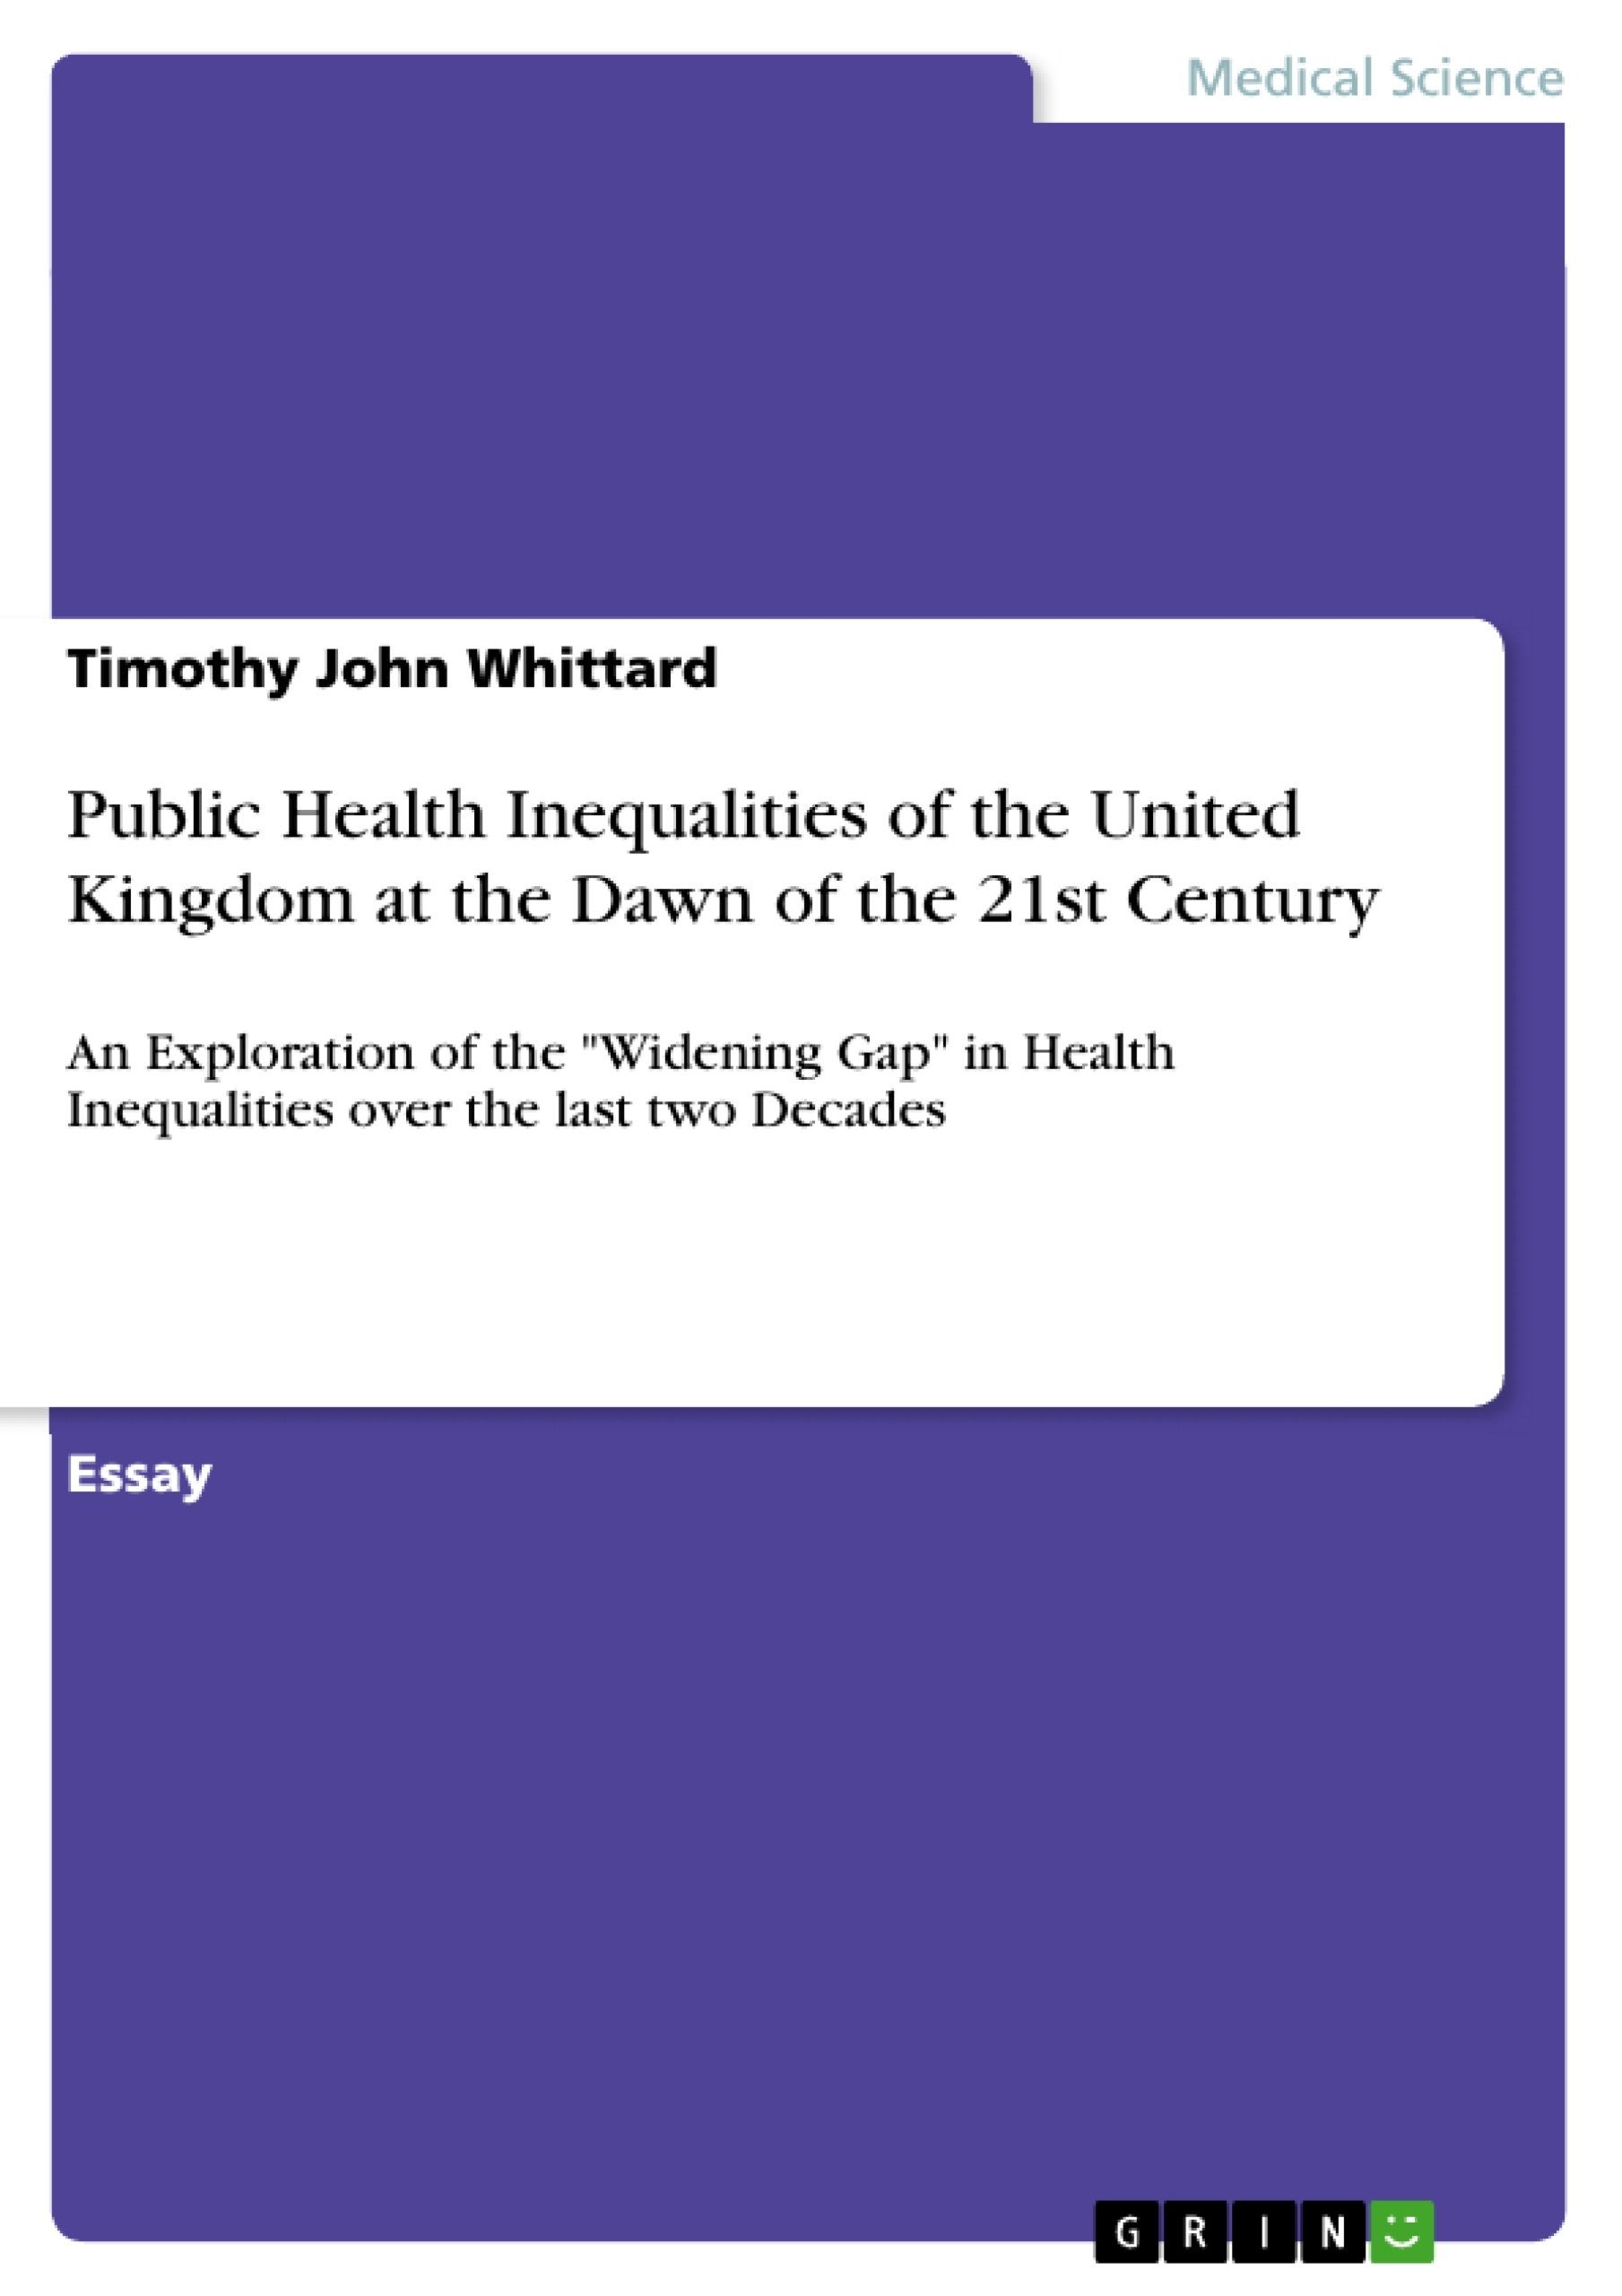 Title: Public Health Inequalities of the United Kingdom at the Dawn of the 21st Century